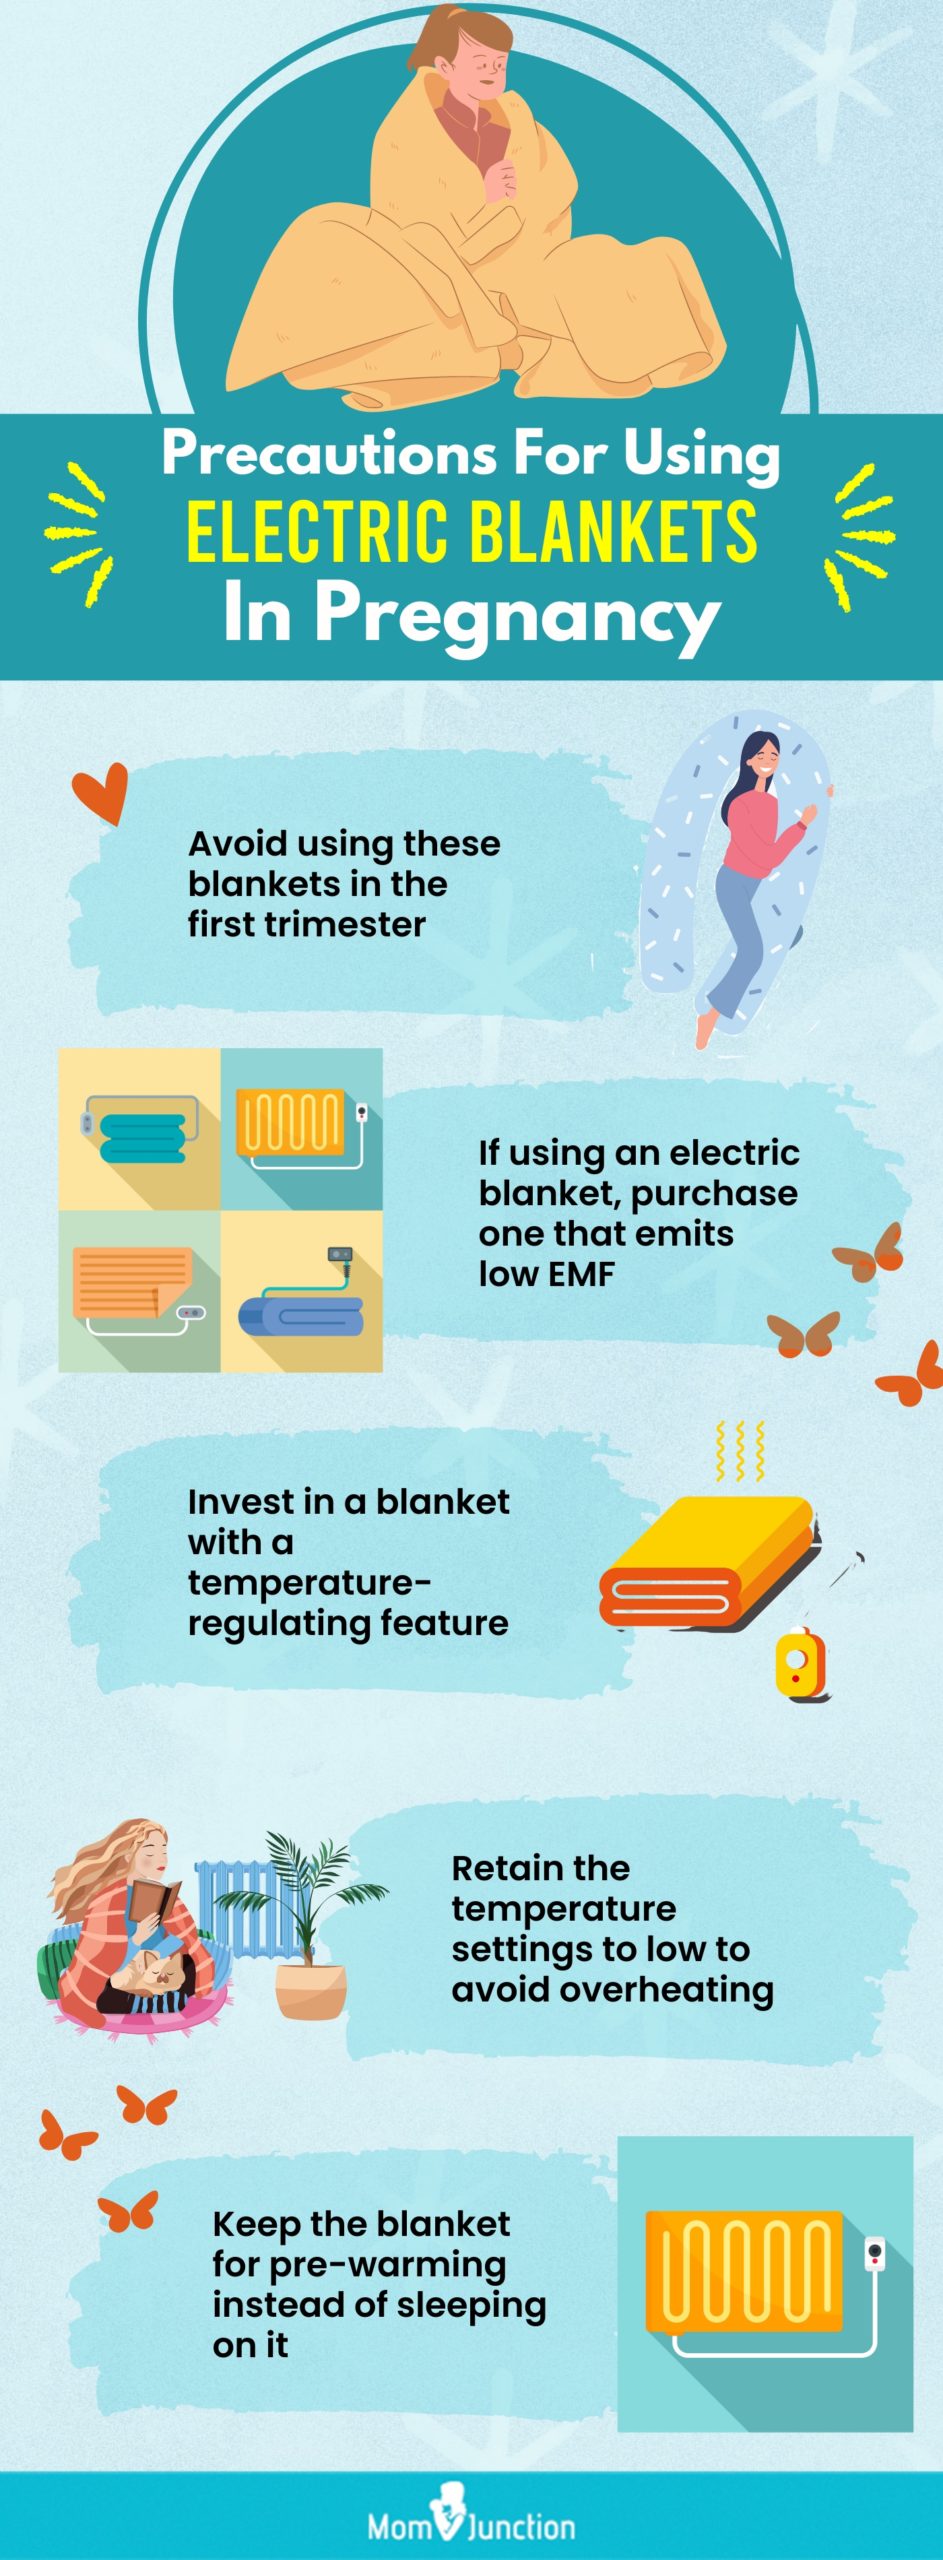 precautions for using electric blankets in pregnancy [infographic]